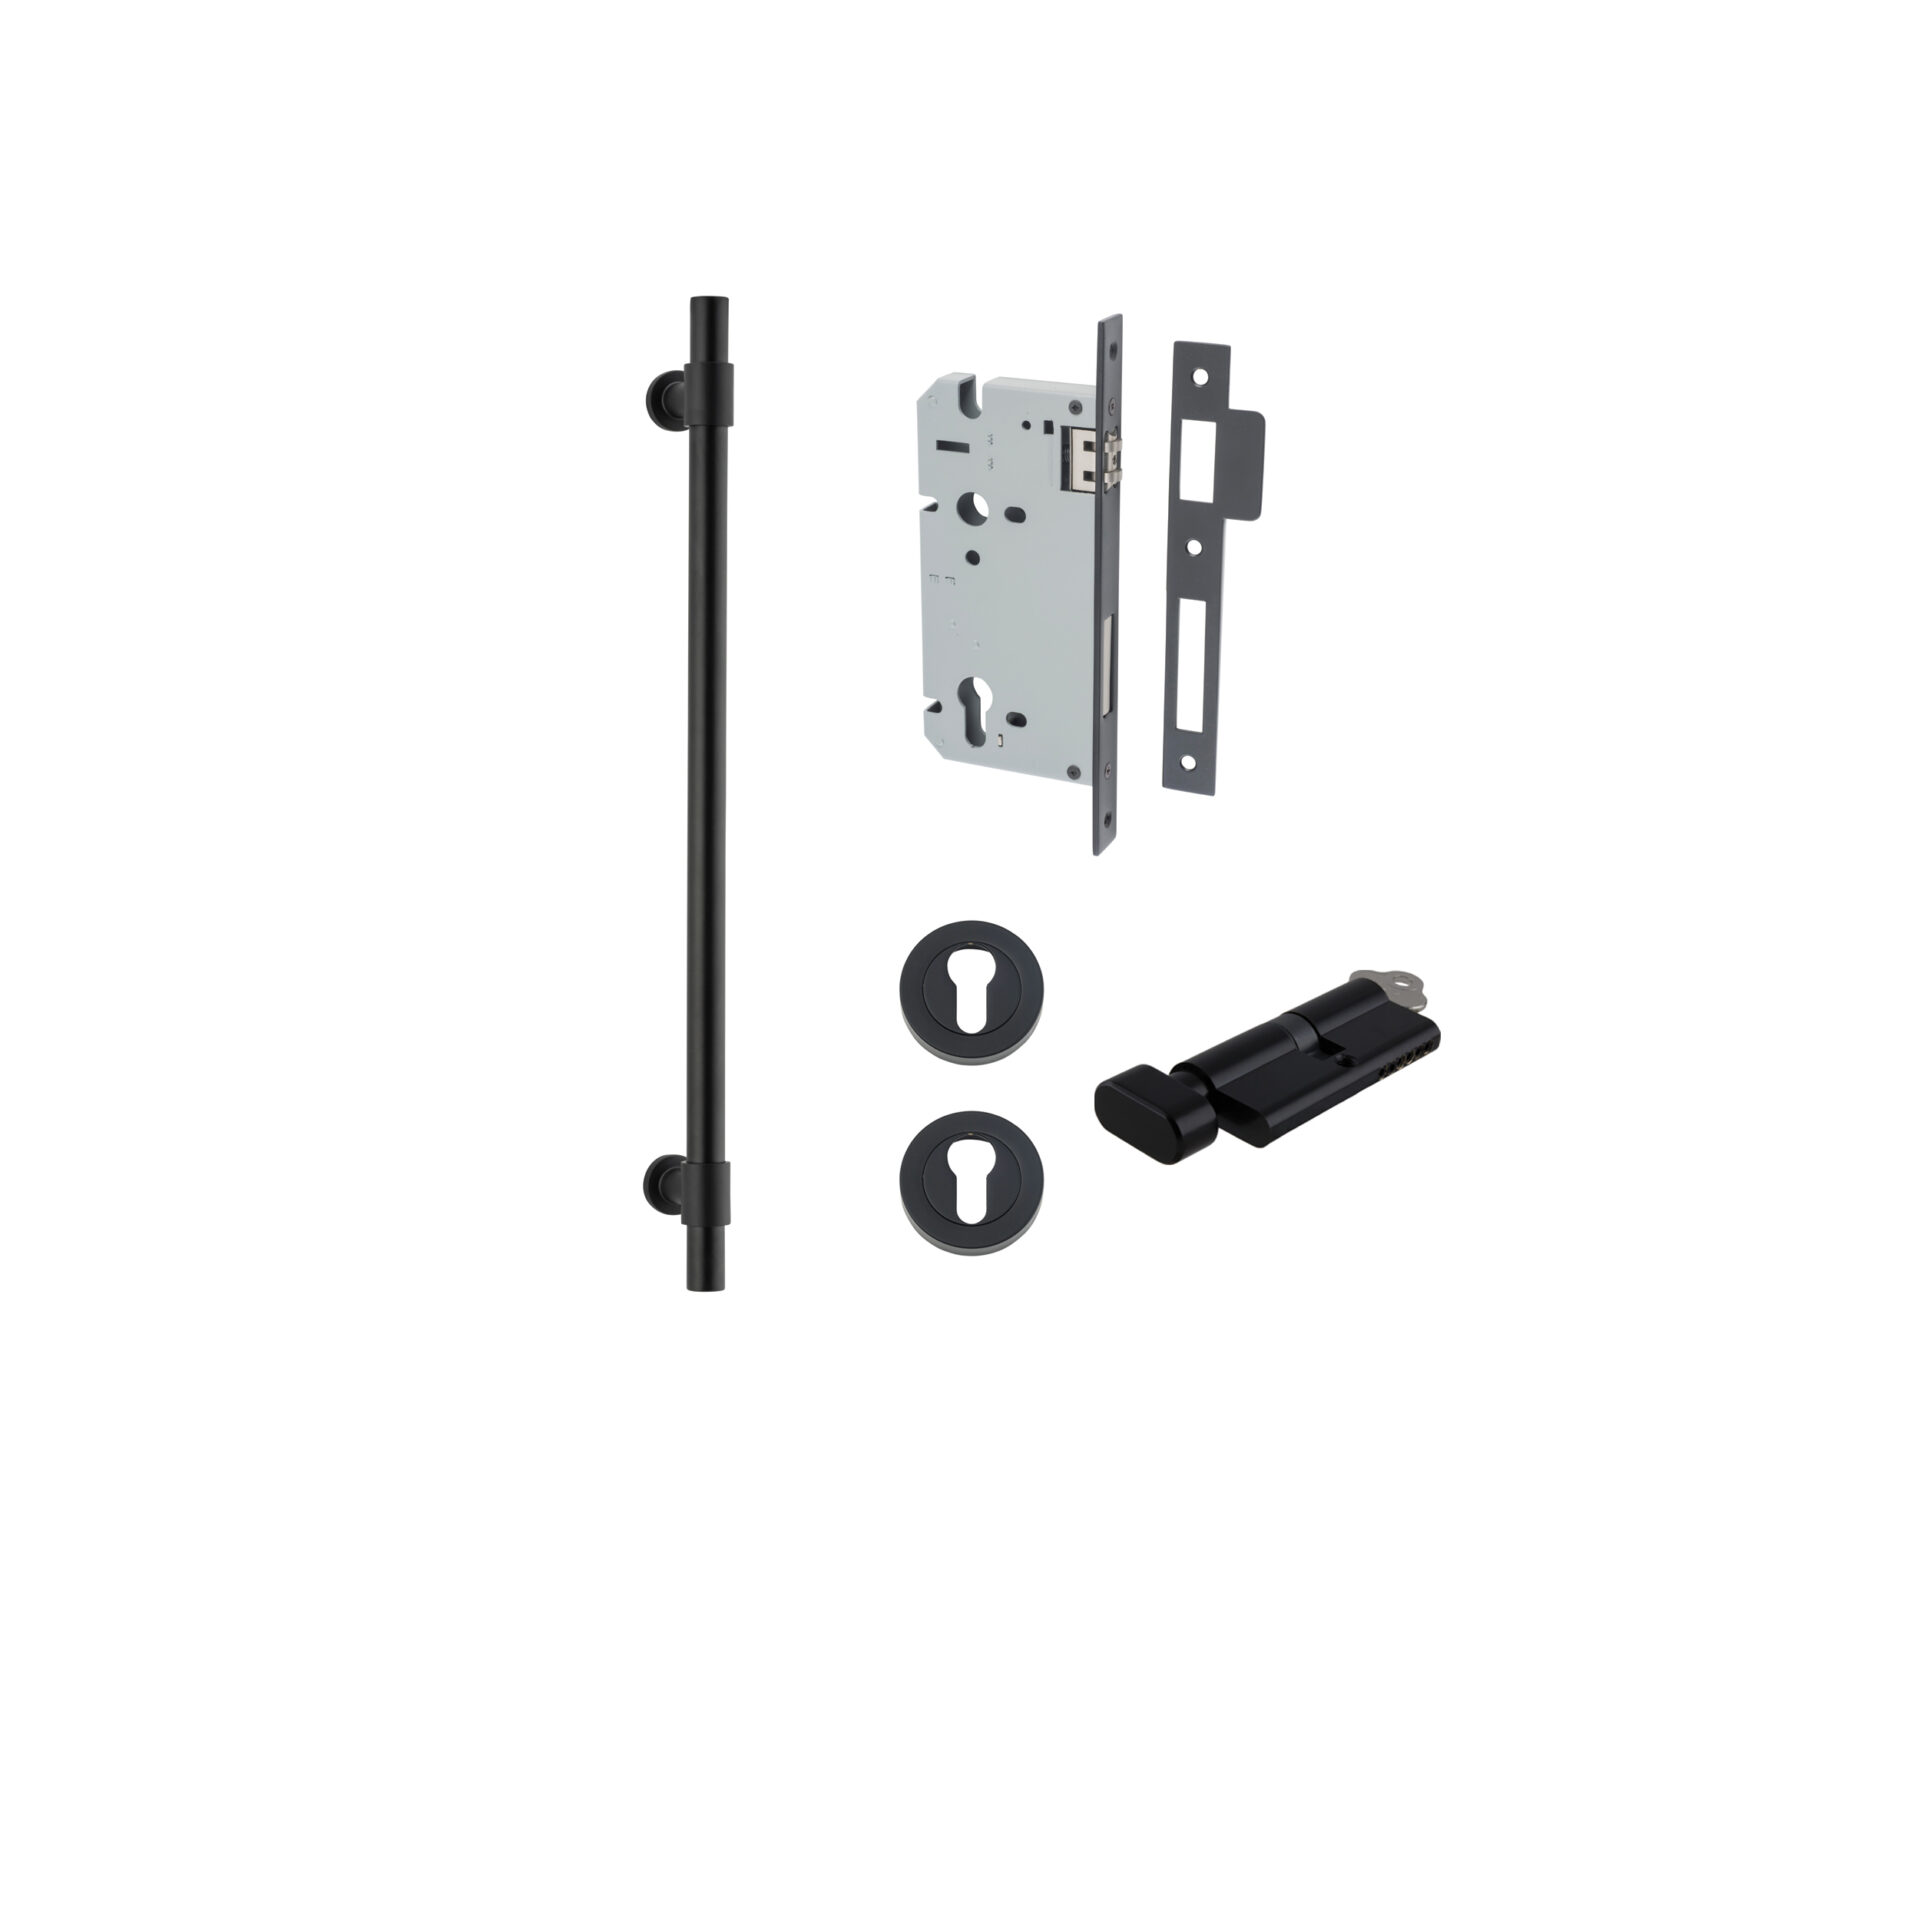 Helsinki Pull Handle - 450mm Entrance Kit with Separate High Security Lock